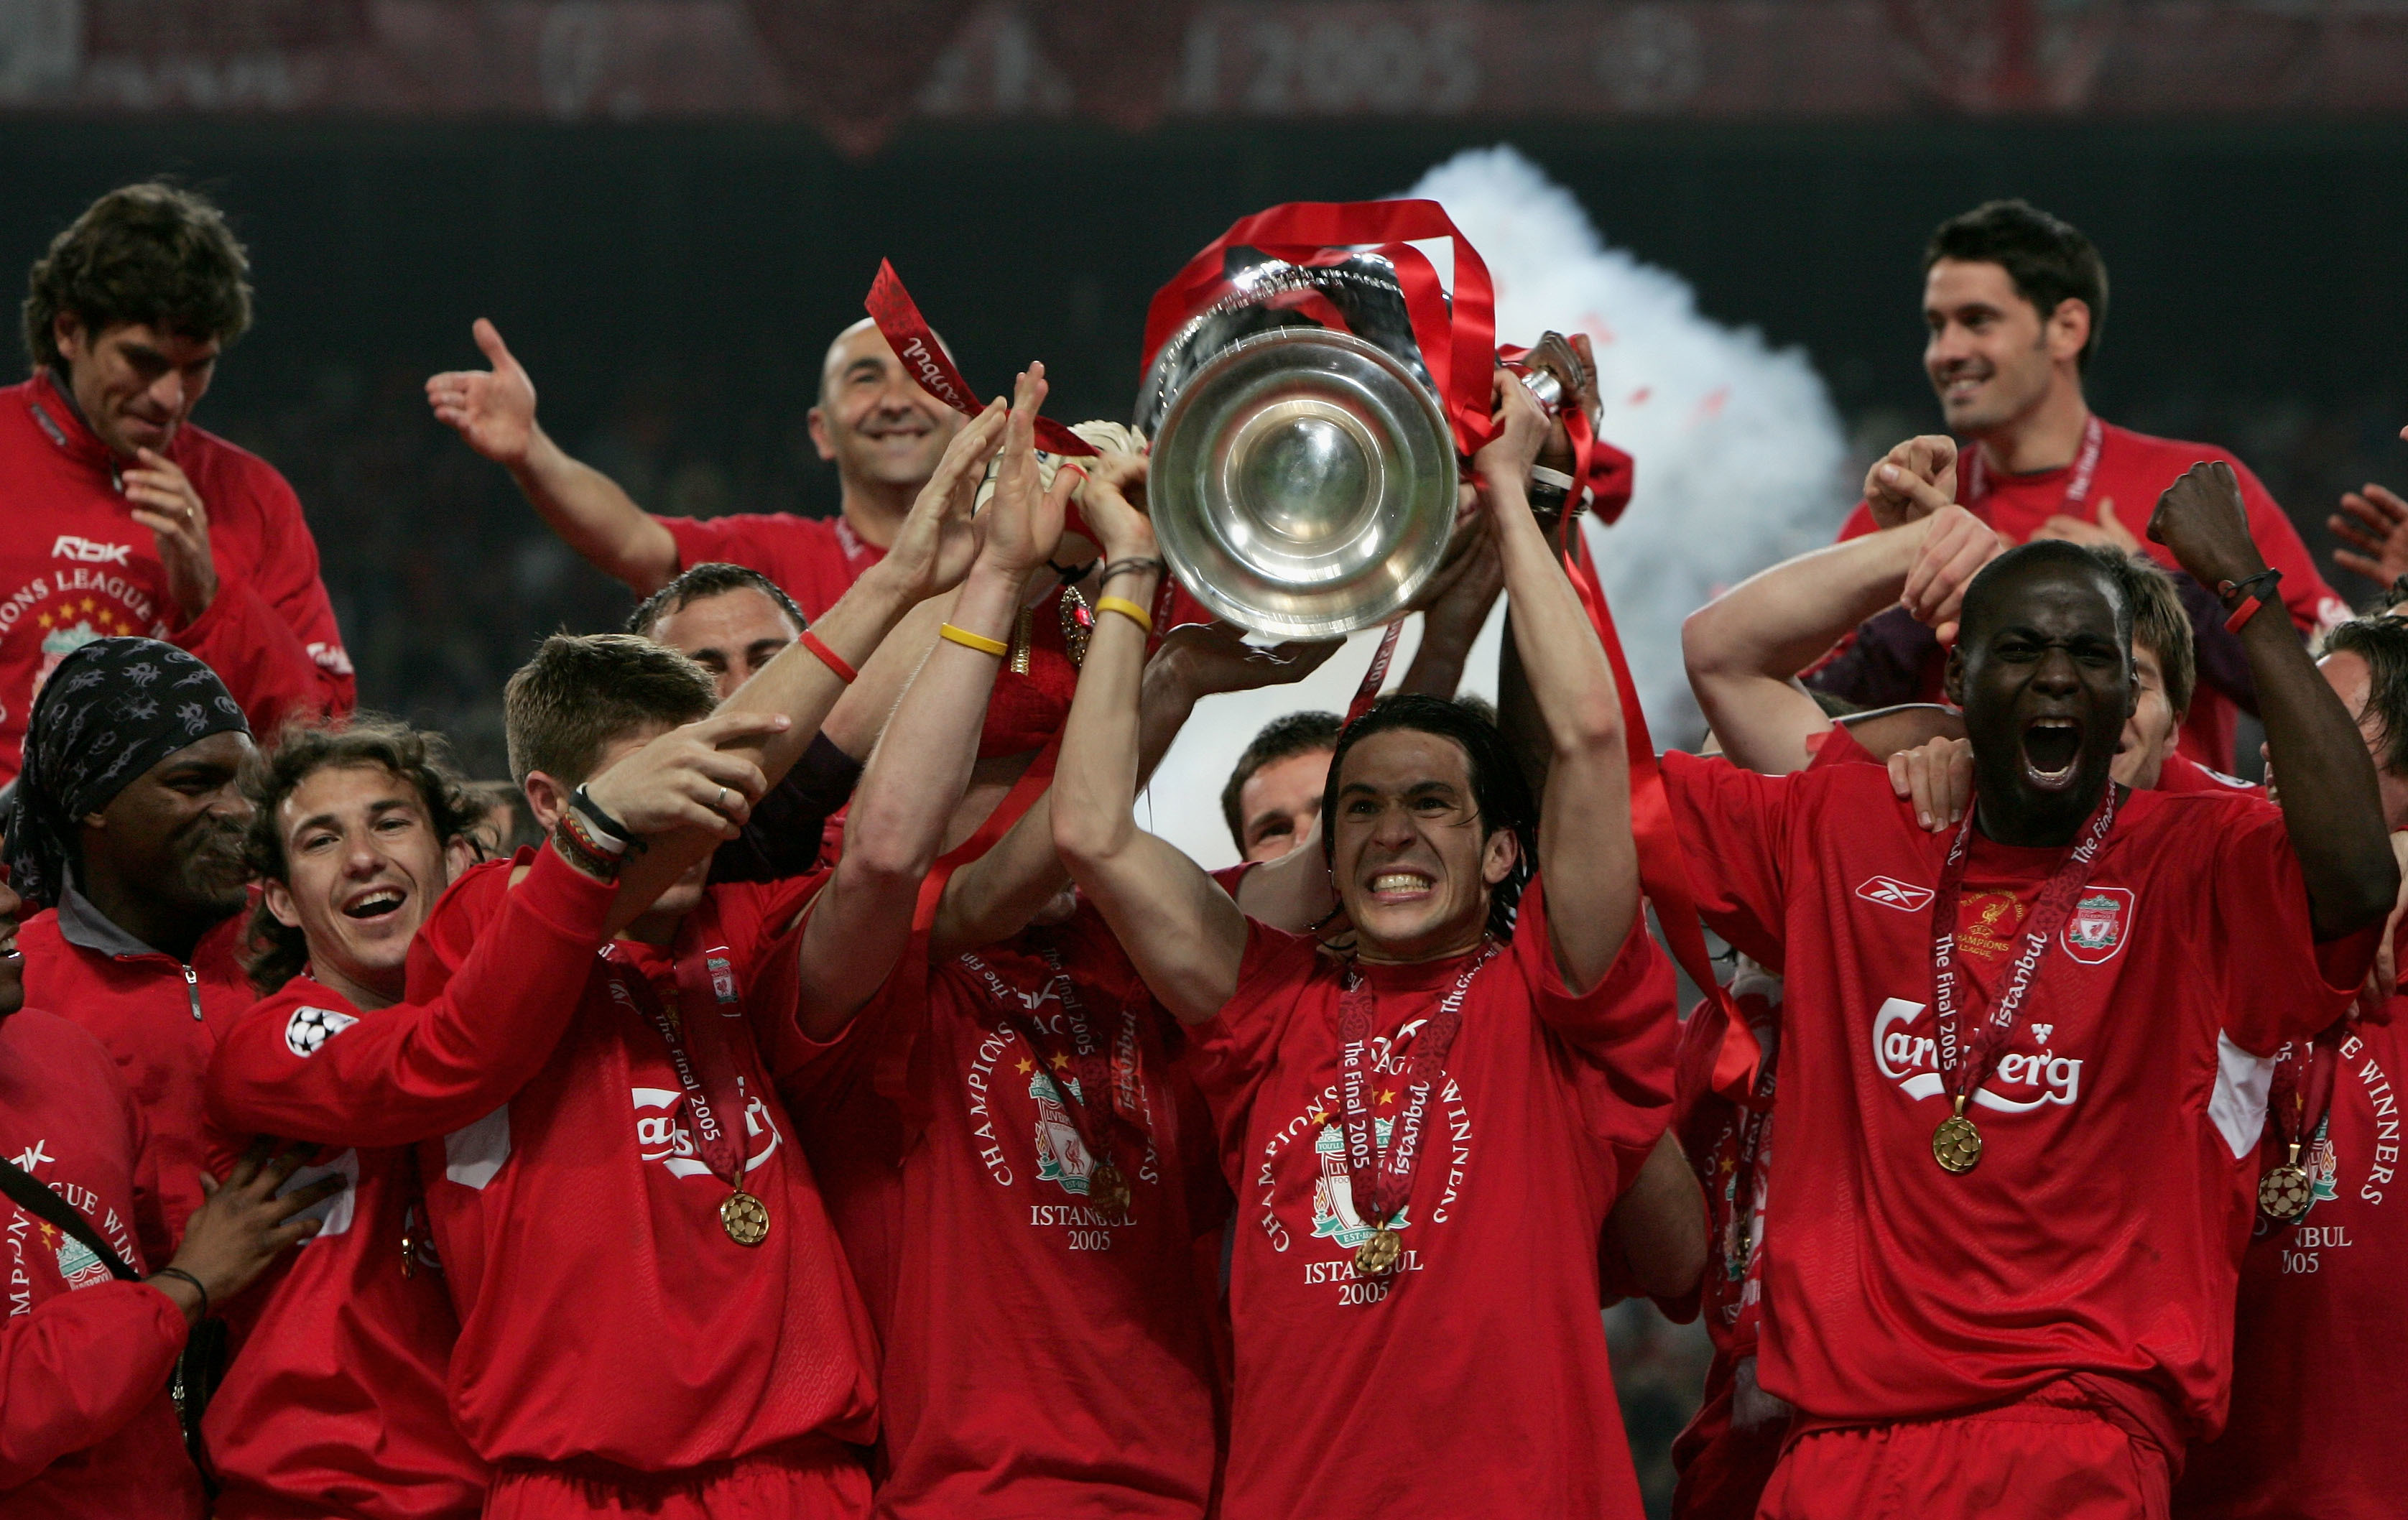 Liverpool forward Luis Garcia lifts the Champions League trophy in Istanbul (Clive Brunskill/Getty Images)